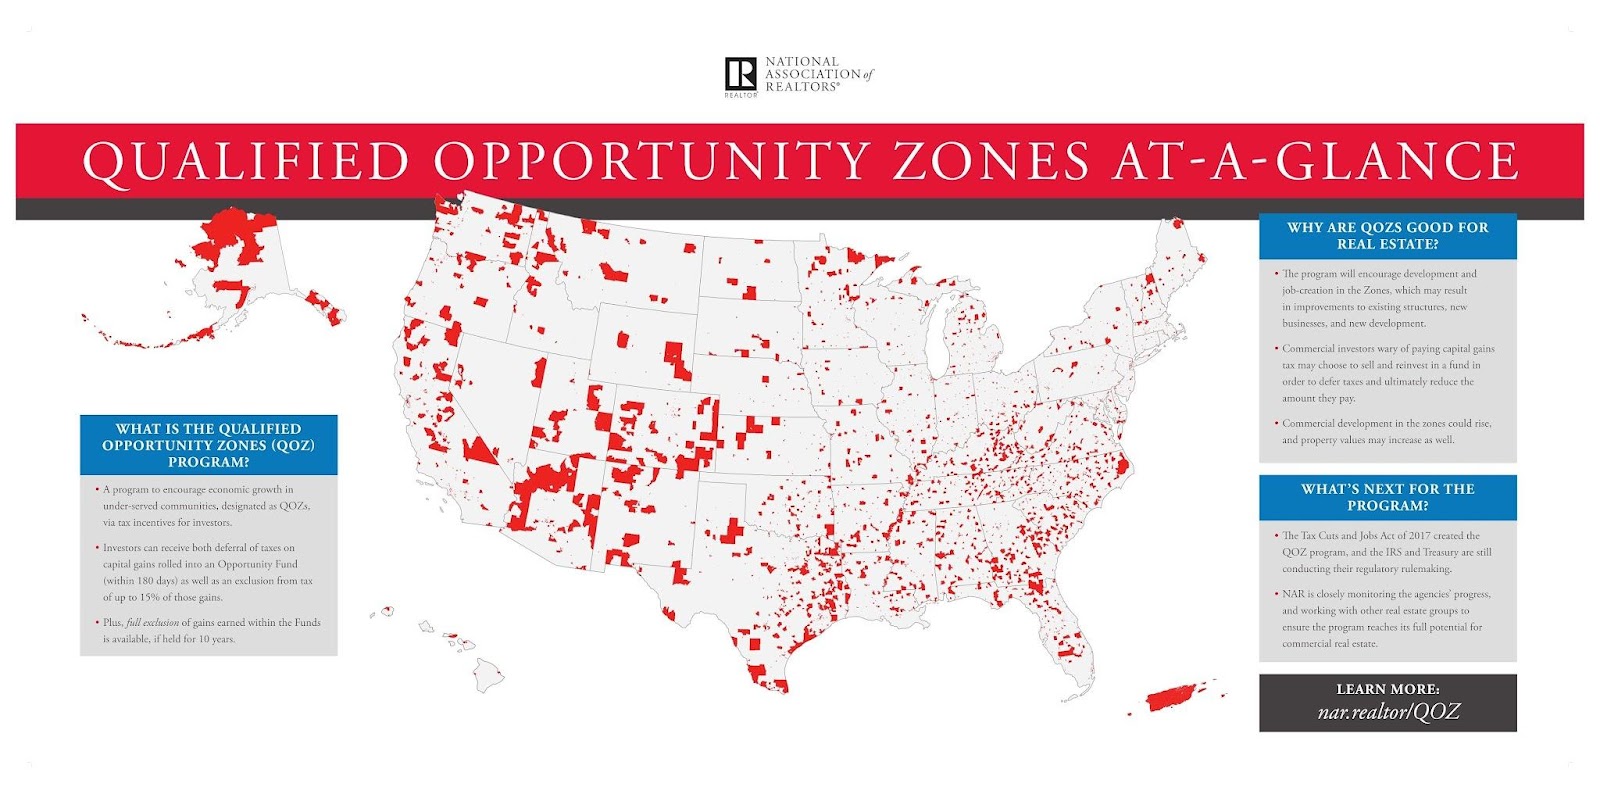 Qualified opportunity zones nationwide 